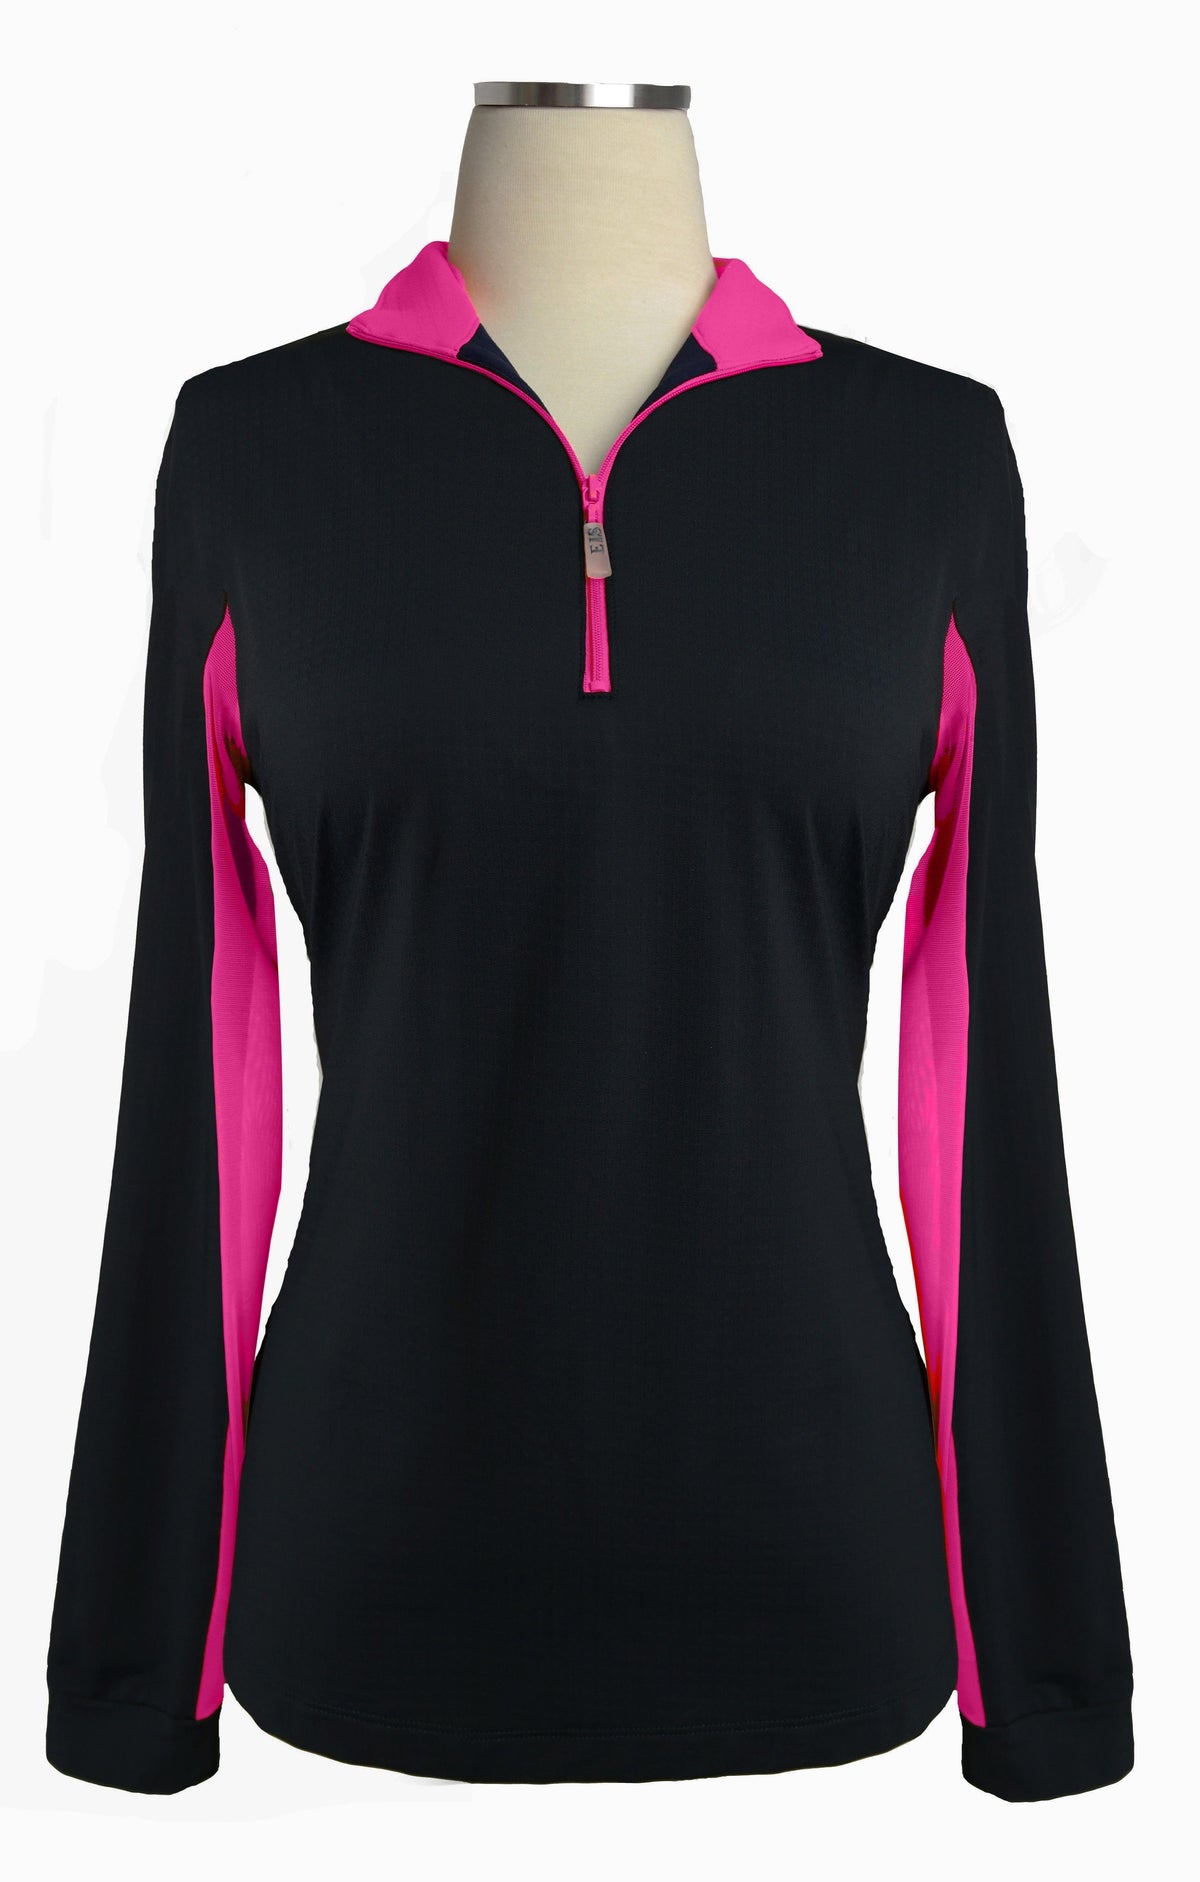 EIS Custom Team Shirts Black/Hot Pink EIS- Sunshirts (L) equestrian team apparel online tack store mobile tack store custom farm apparel custom show stable clothing equestrian lifestyle horse show clothing riding clothes horses equestrian tack store